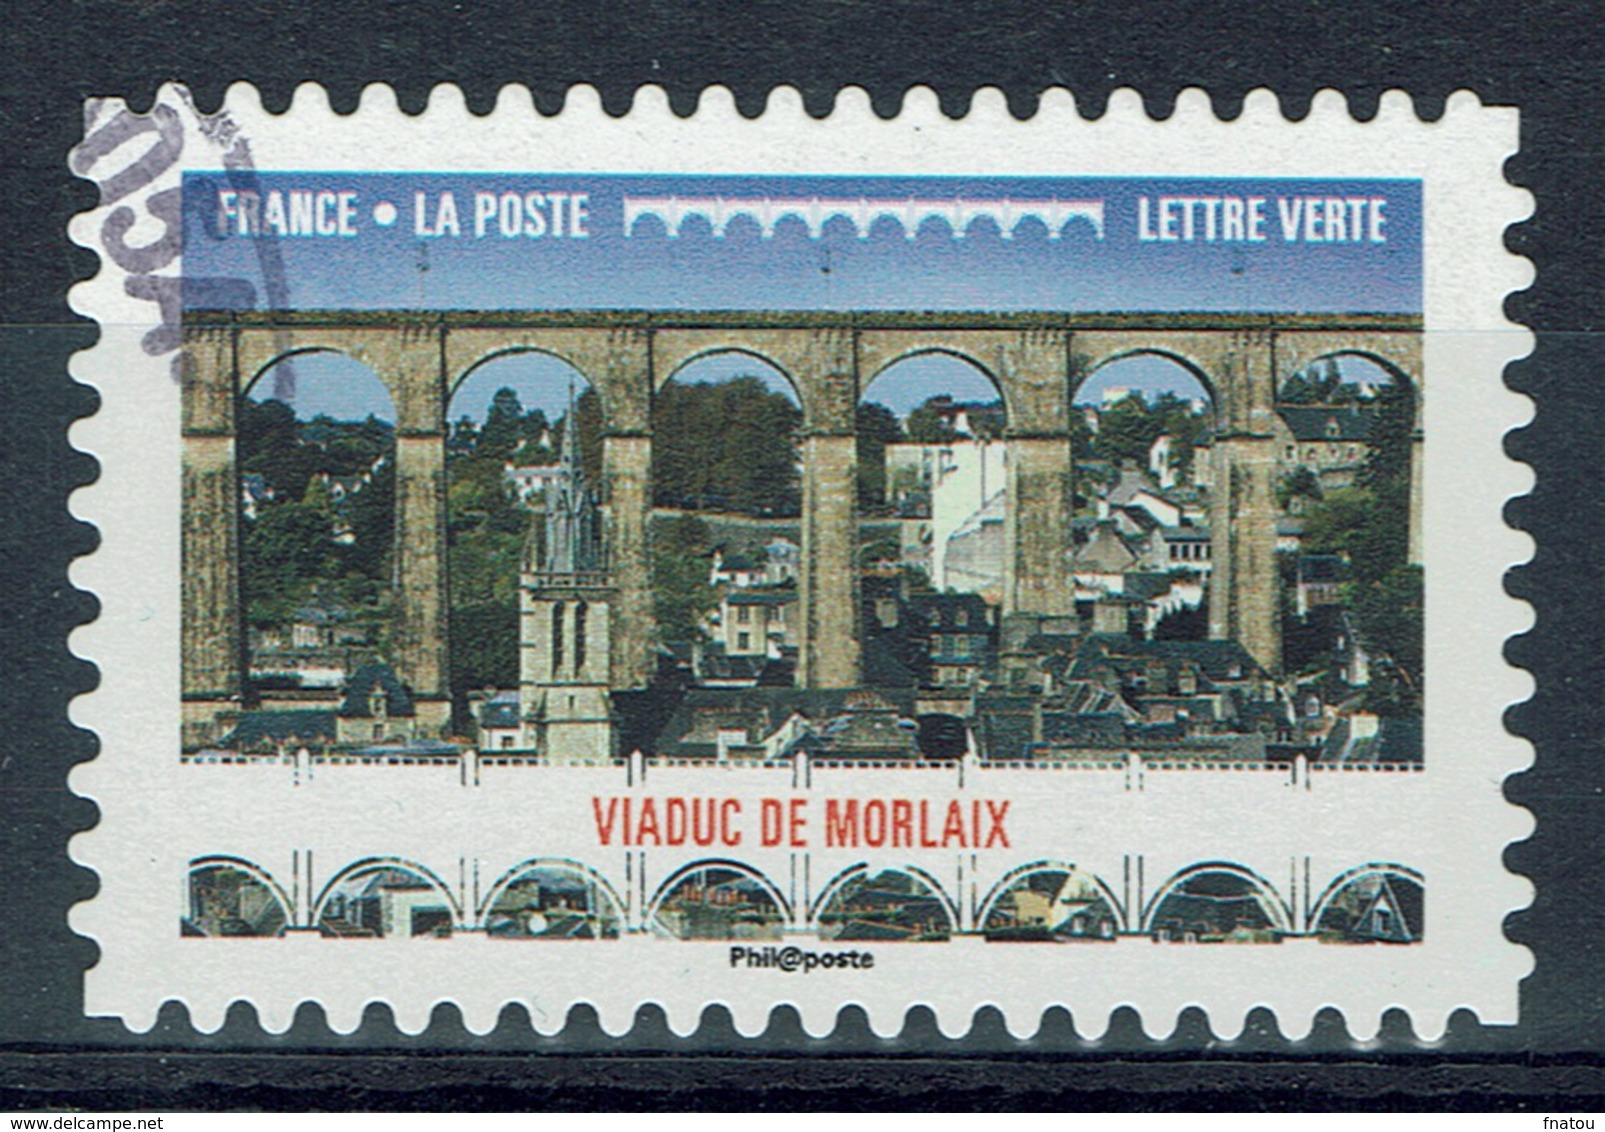 France, Viaduct In Morlaix, Brittany, 2017, VFU Self-adhesive - Used Stamps